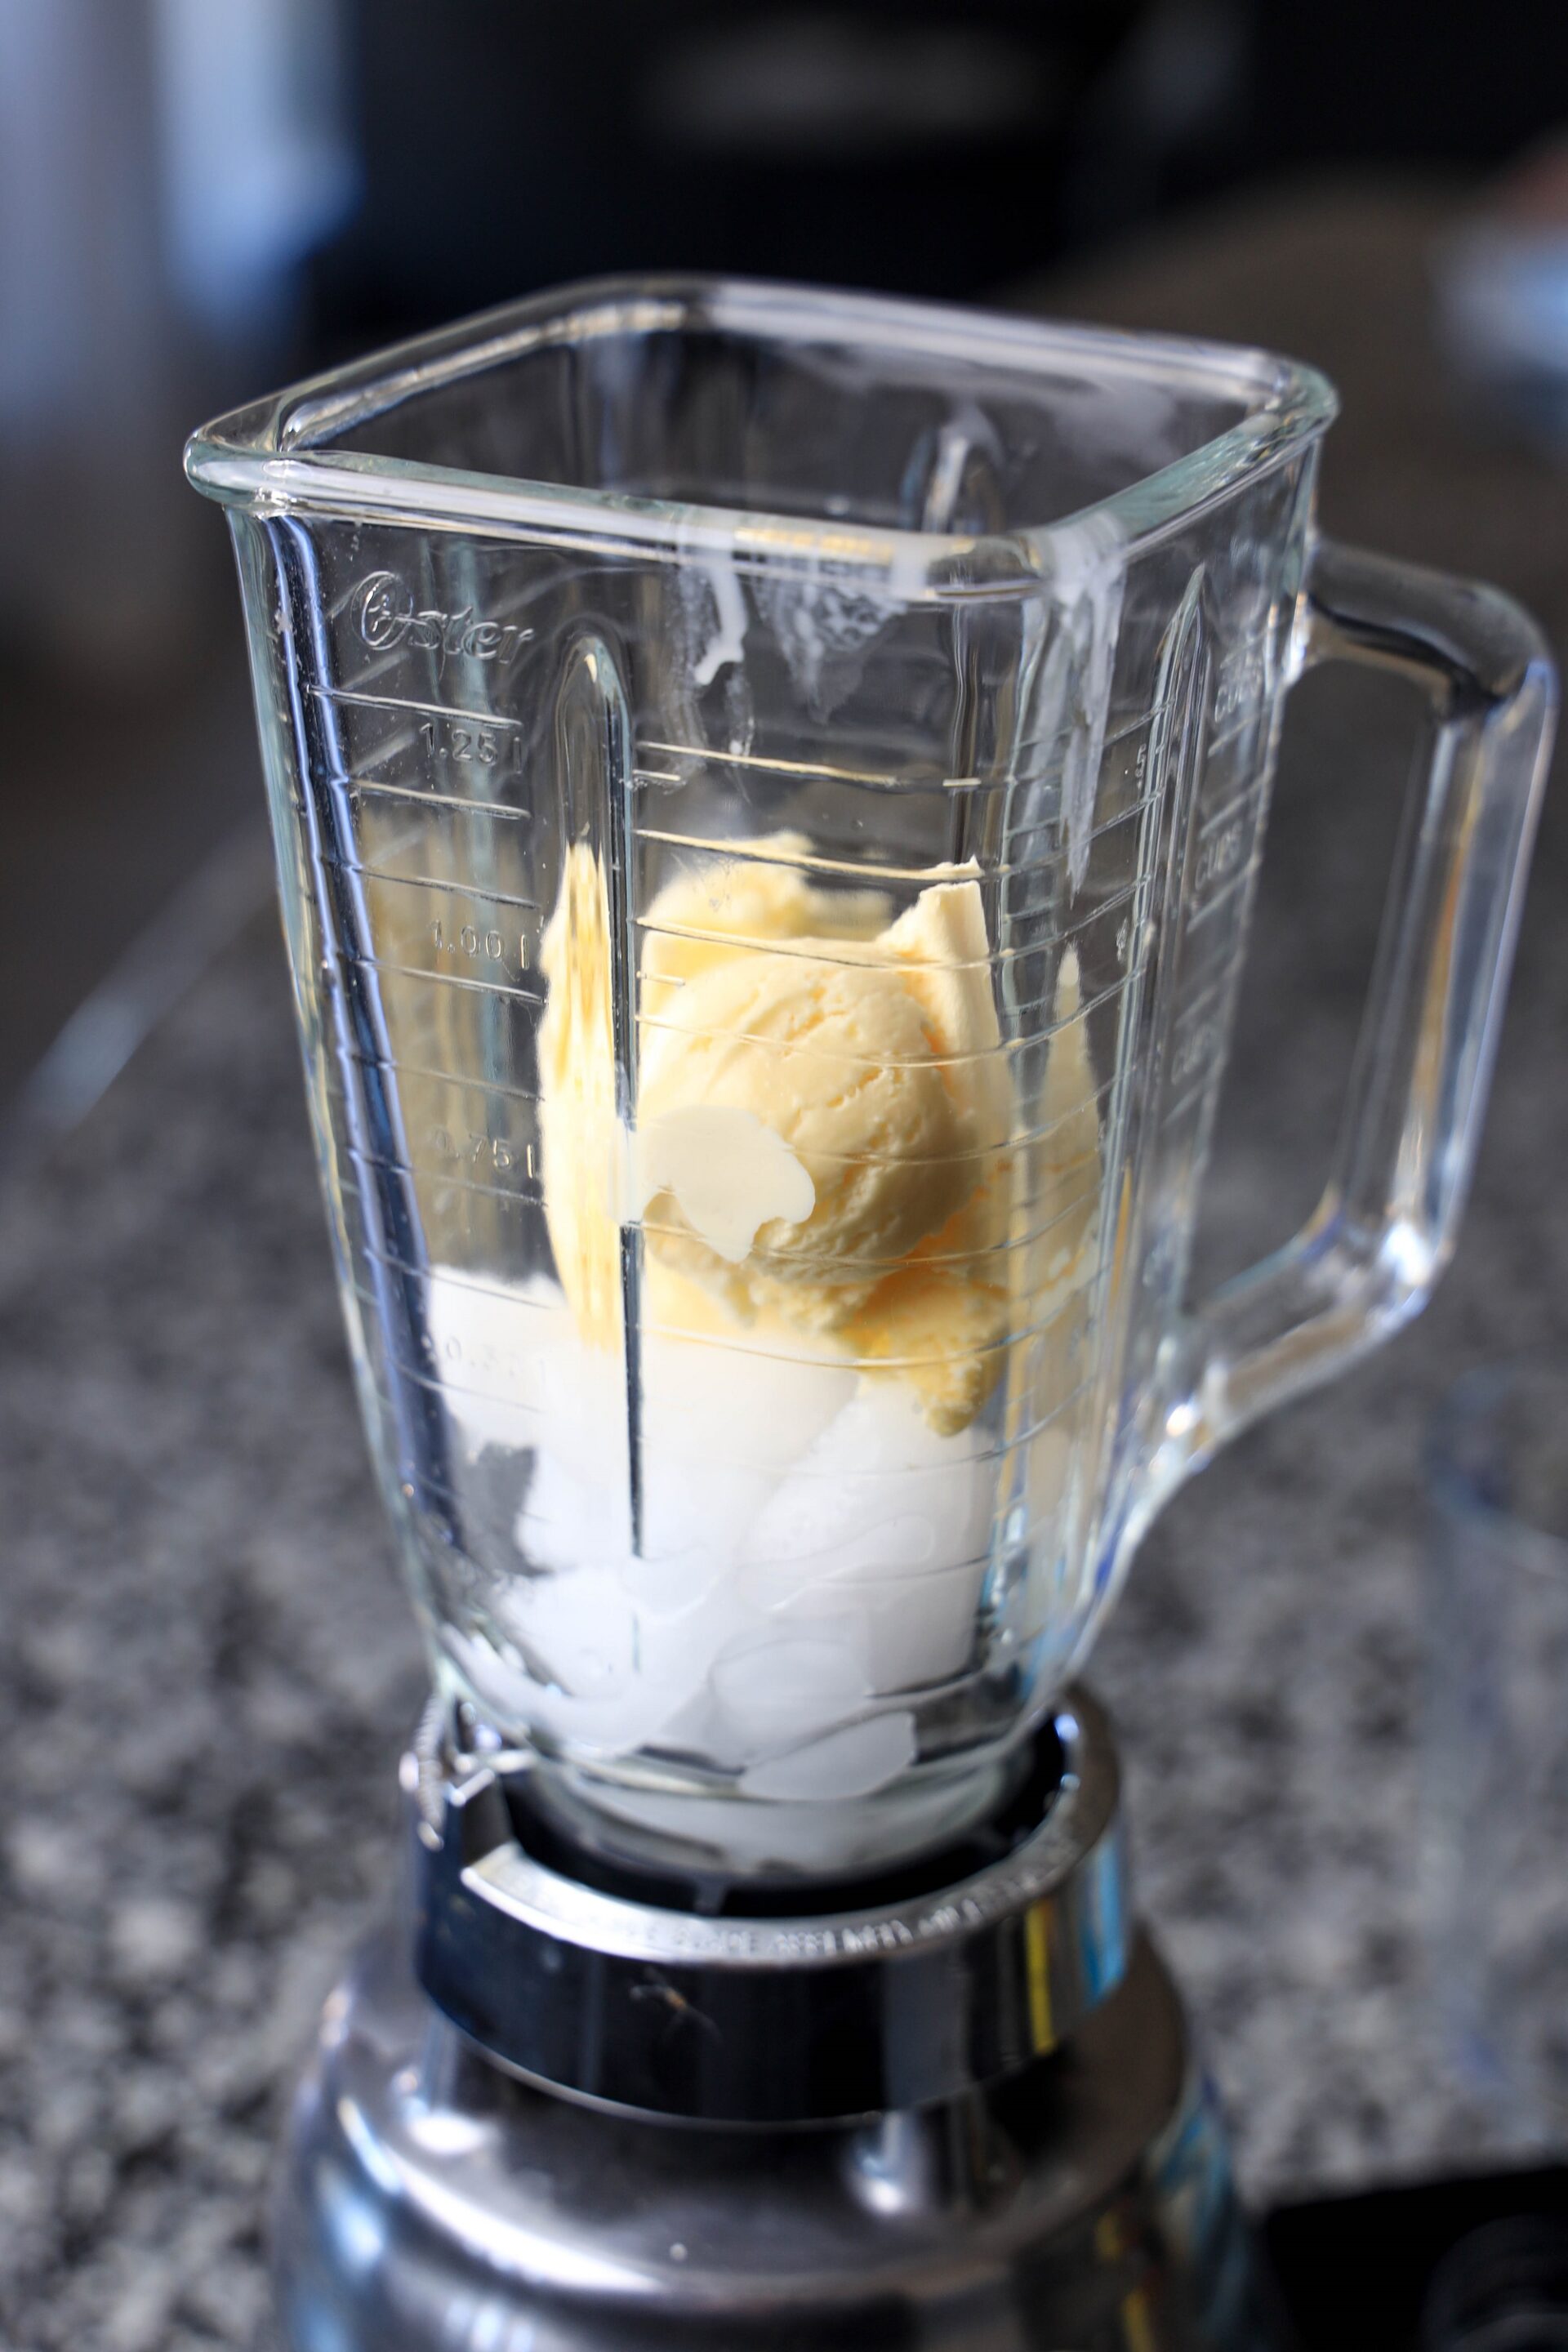 Ice cream and ice cubes in a blender.